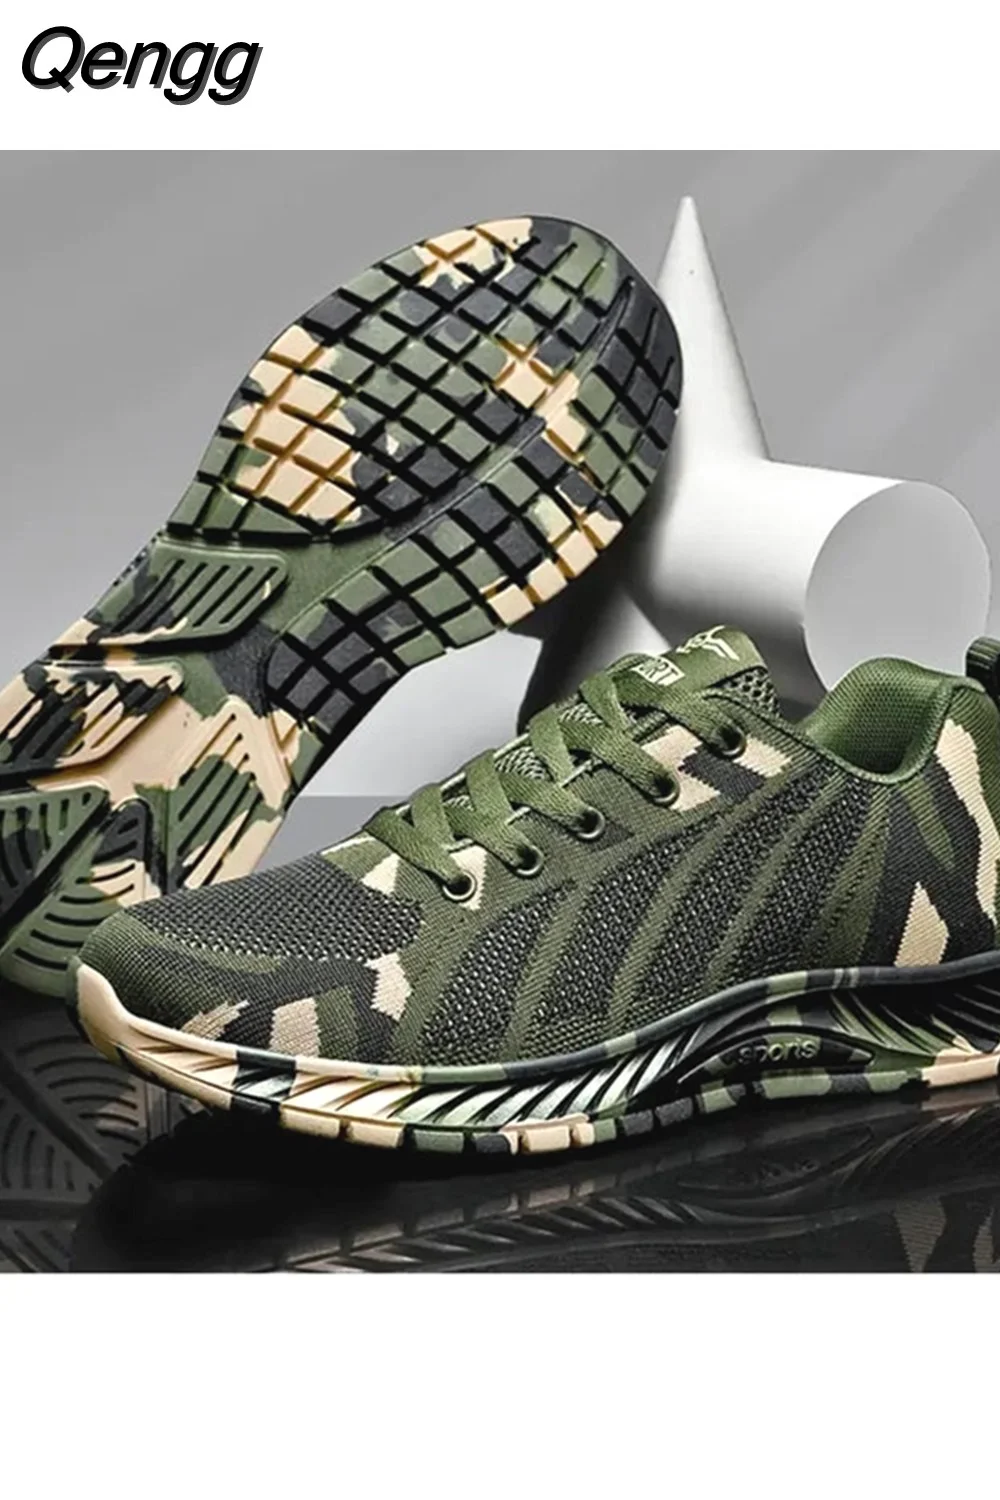 Qengg New Camouflage Fashion Sneakers Women Breathable Casual Shoes Men Army Green Trainers Plus Size 34-44 Lover Shoes 420-0